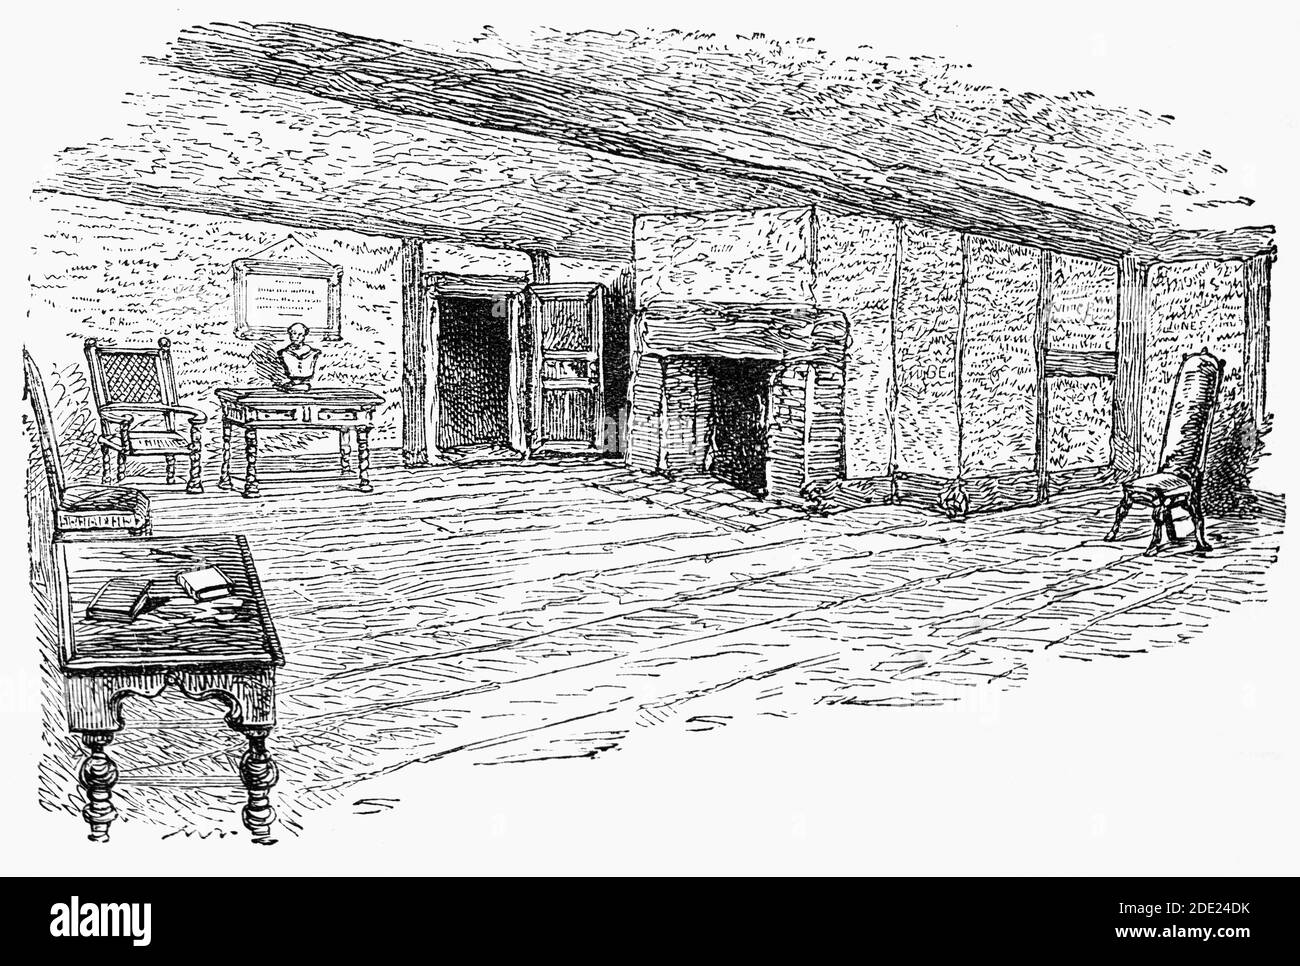 A 19th Century view of the room where William Shakespeare was born in Stratford-upon-Avon.  His date of birth is unknown, but is traditionally observed on 23 April, Saint George's Day. Shakespeare (1564-1616) became an English playwright, poet, and actor, widely regarded as the greatest writer in the English language and the world's greatest dramatist. He is often called England's national poet, the 'Bard of Avon', or simply 'the Bard'. Stock Photo